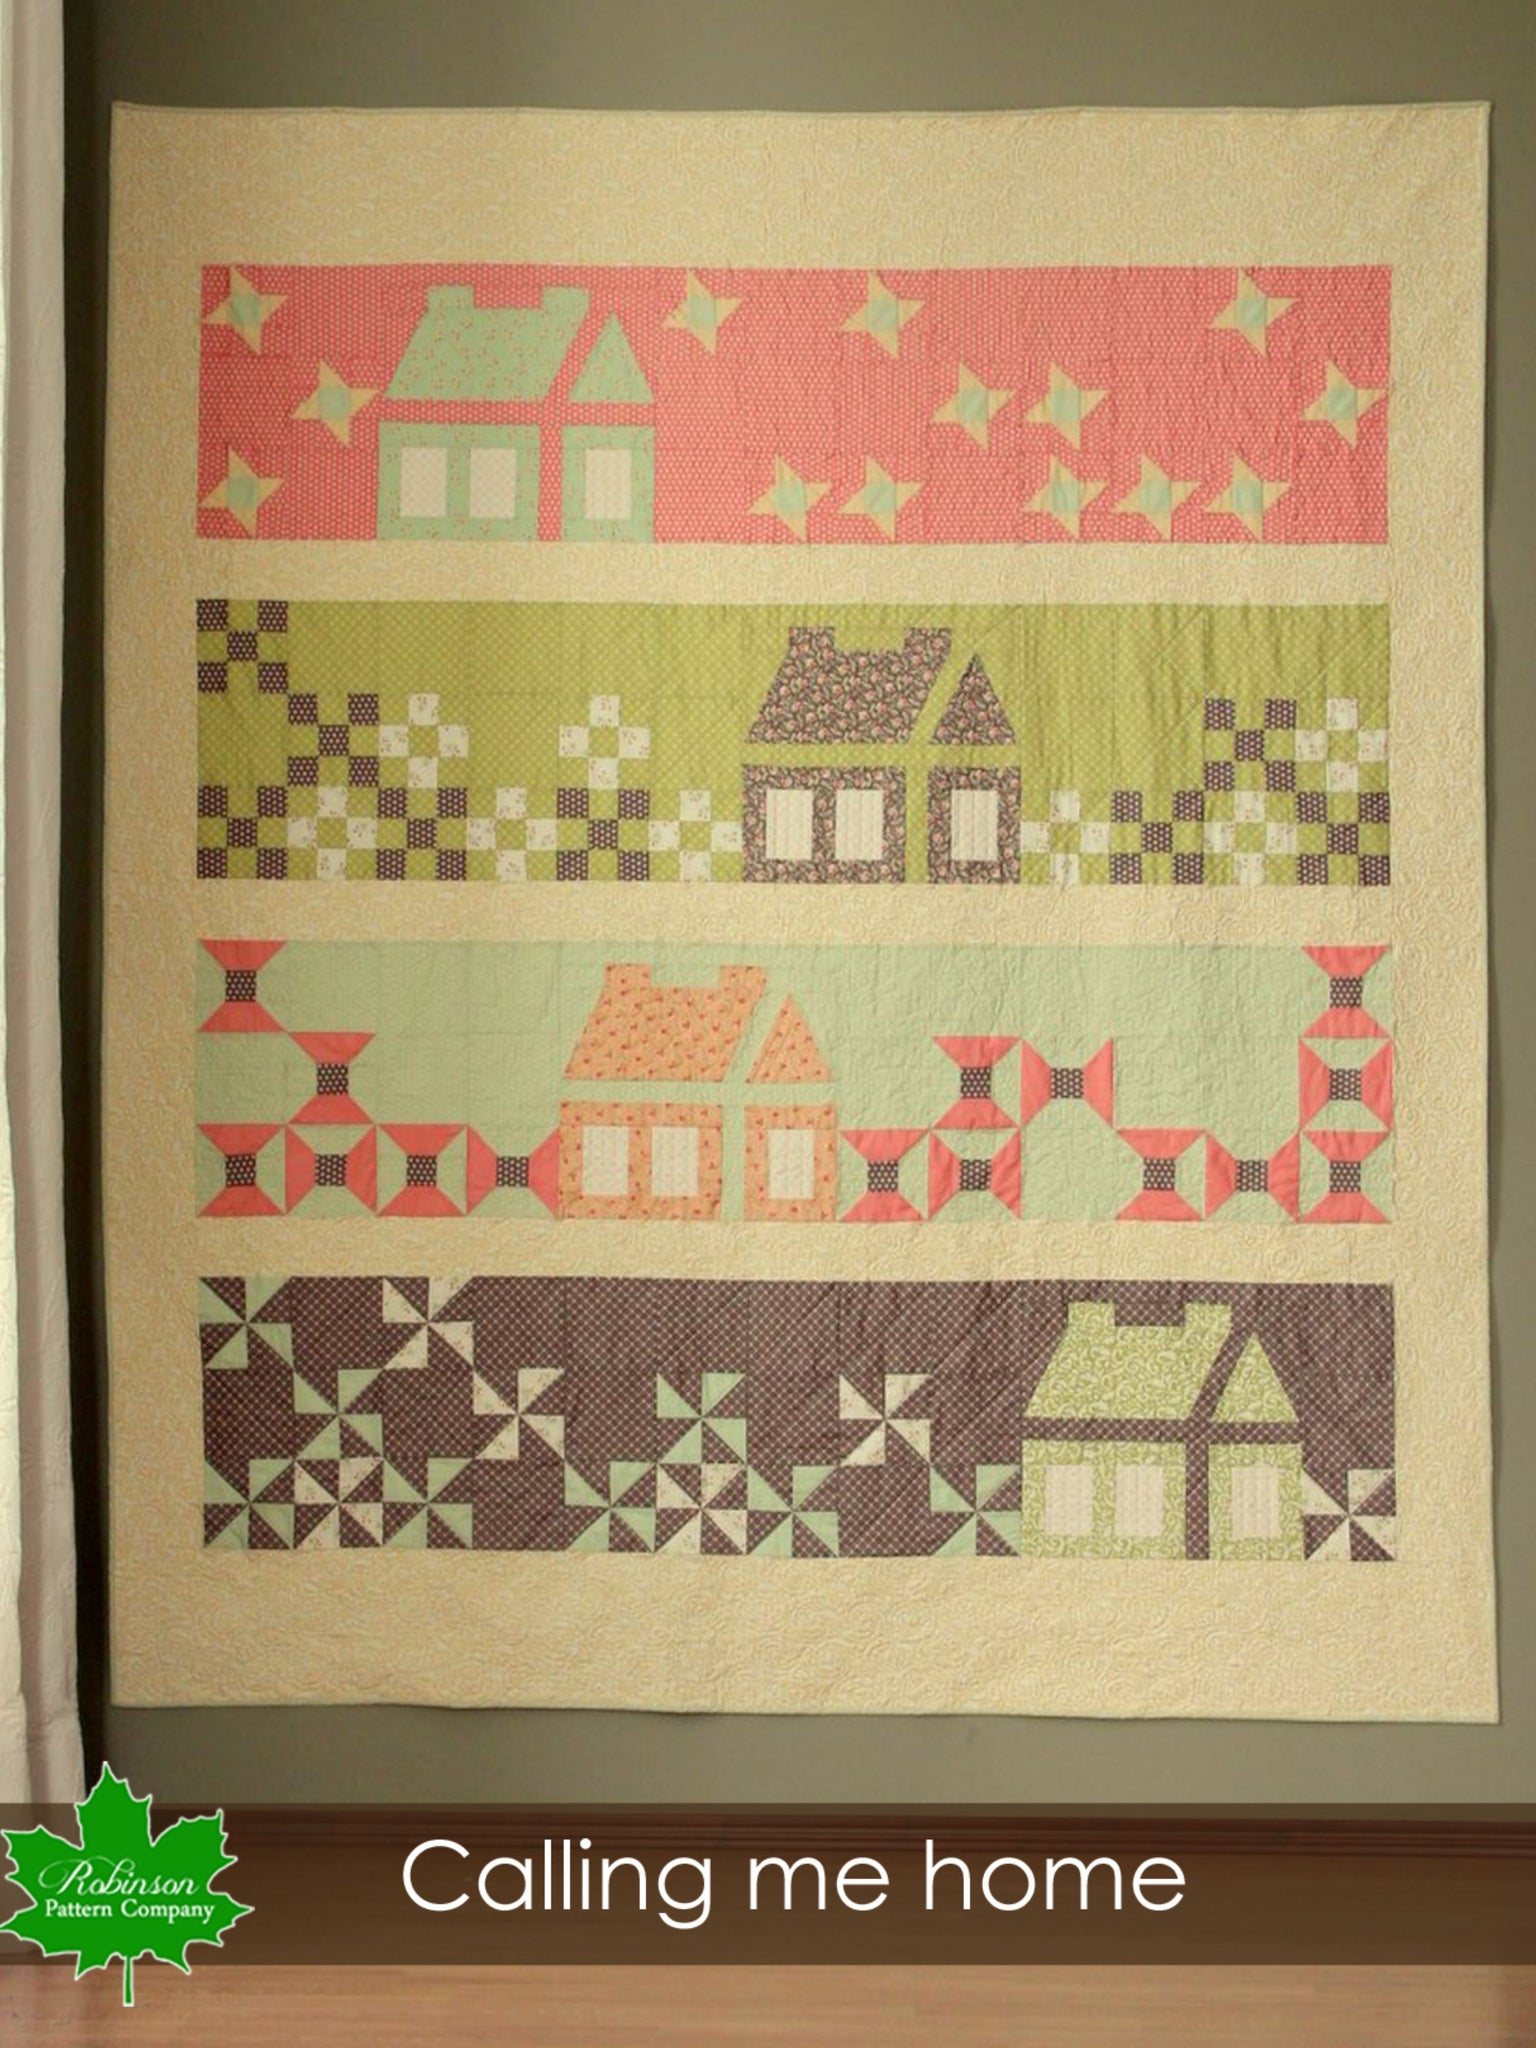 Calling me home quilt pattern